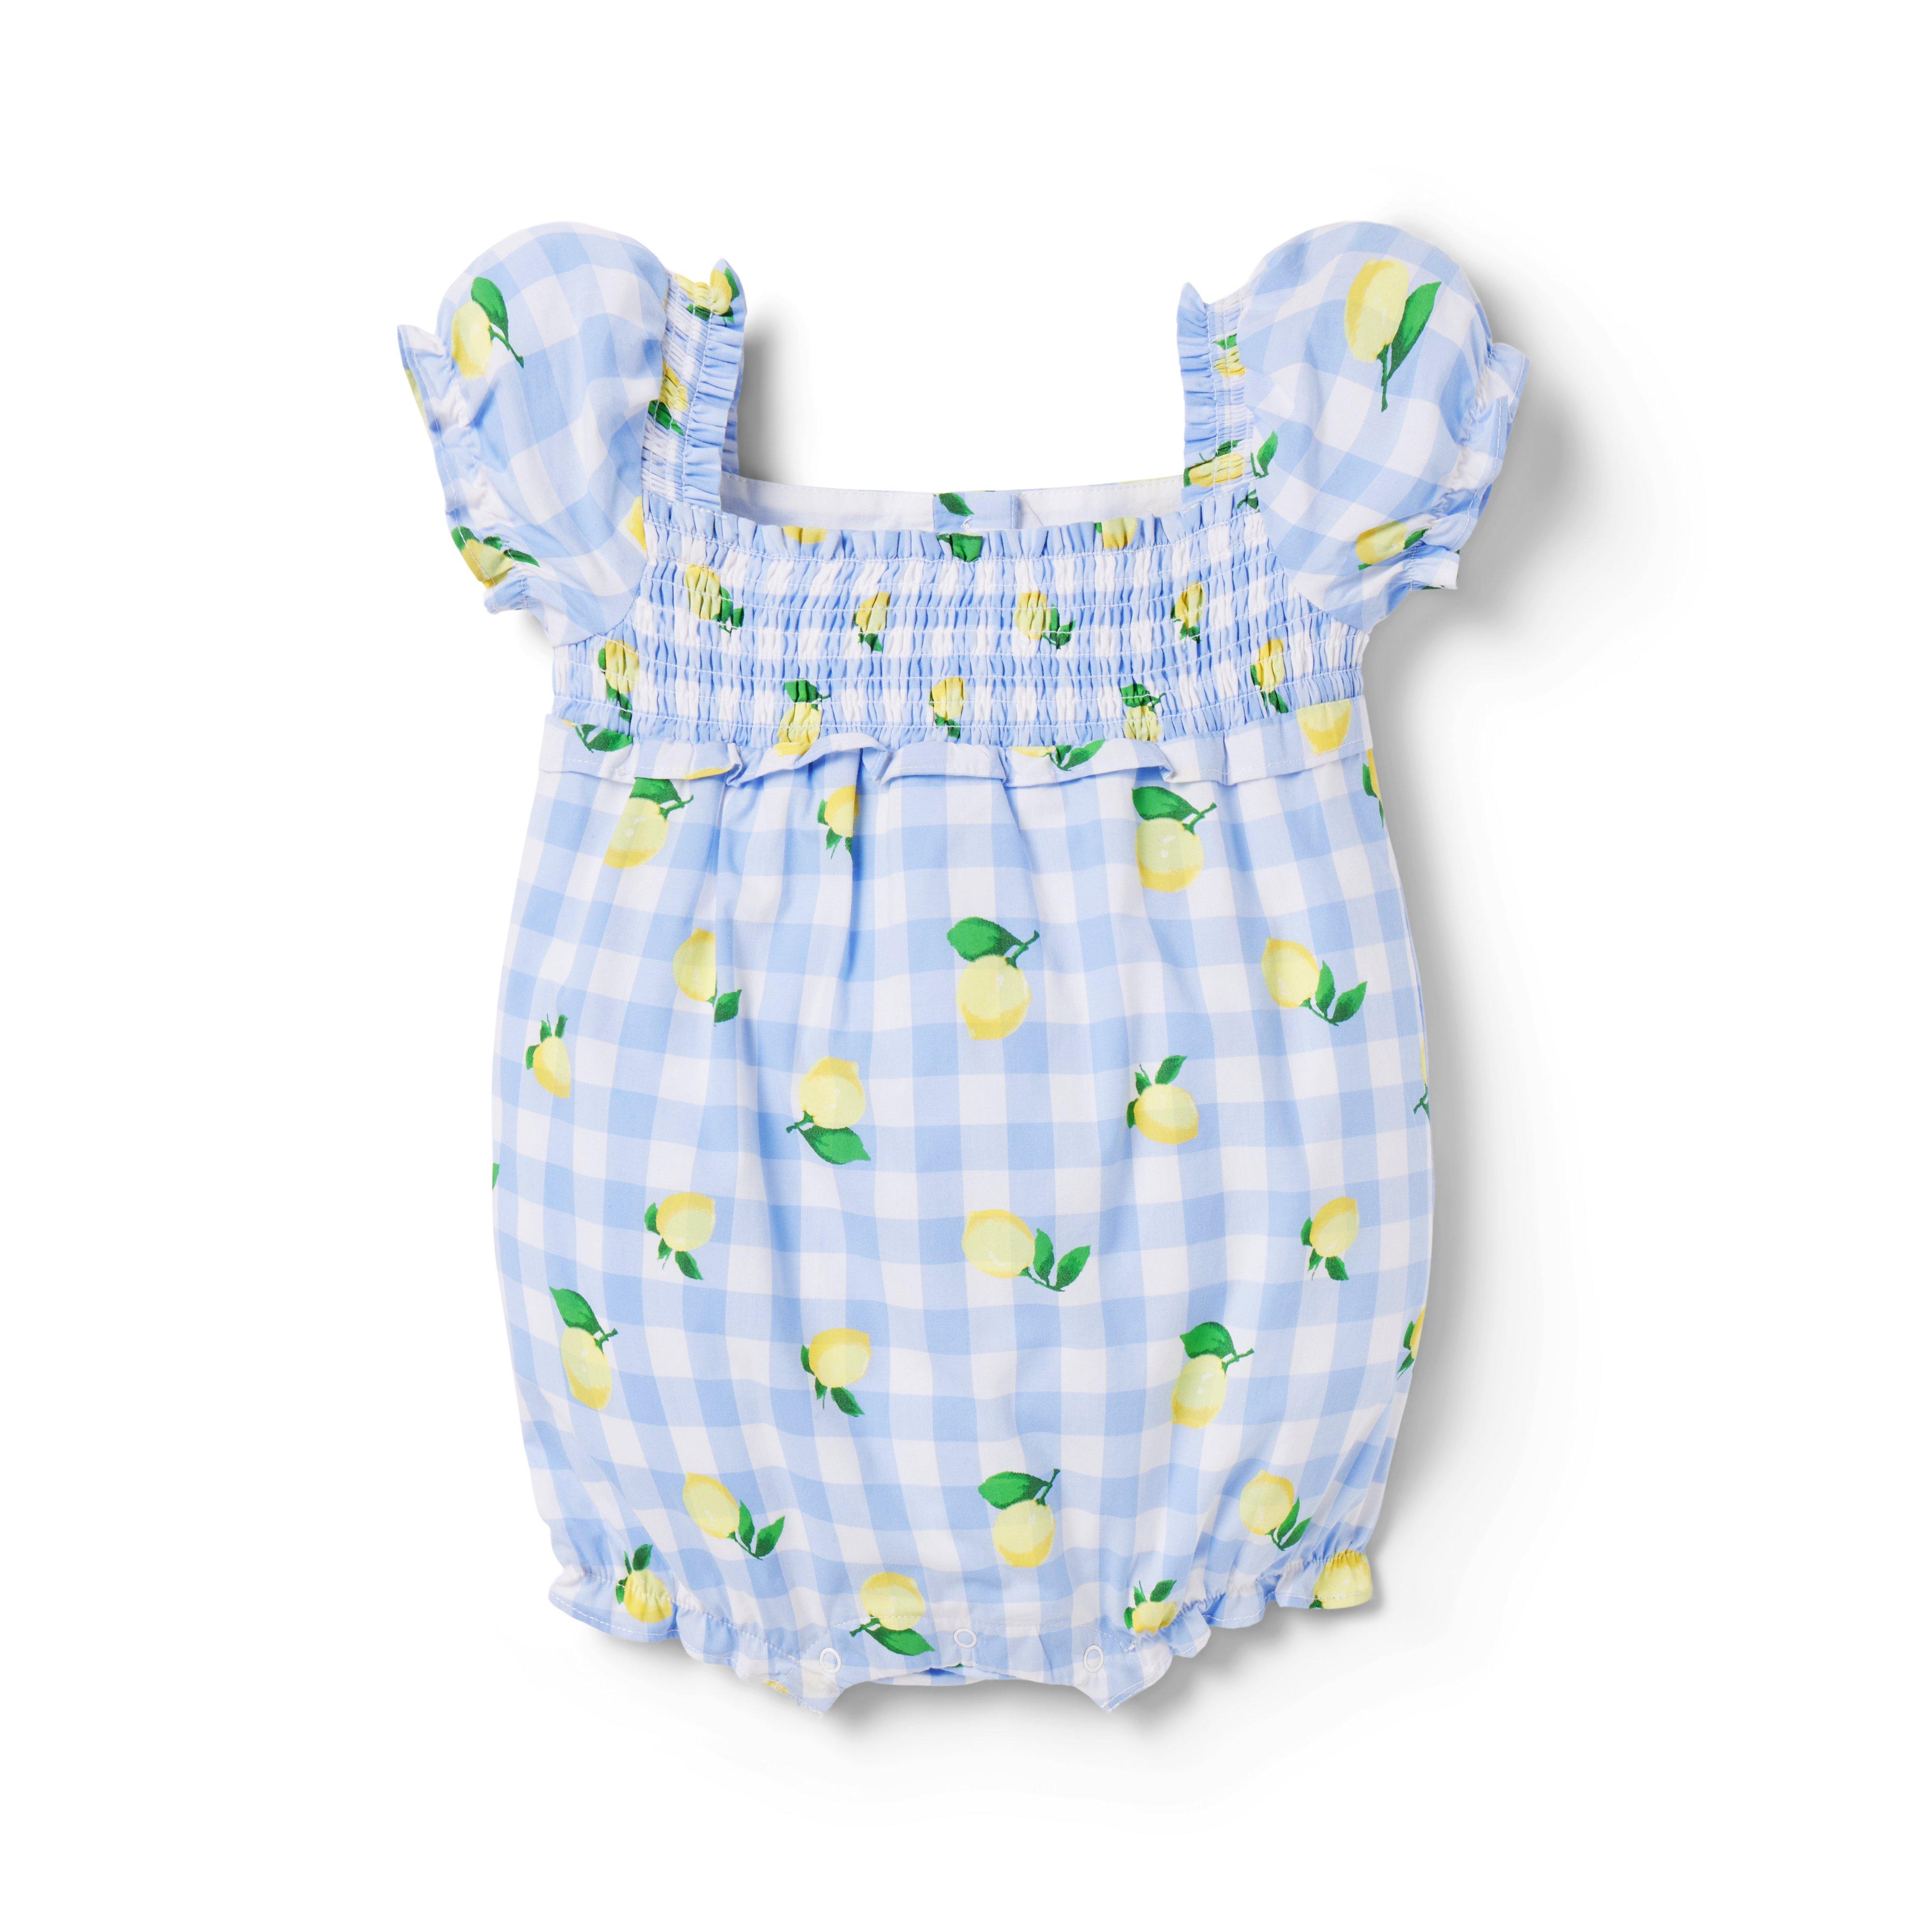 The Lily Smocked Baby Romper